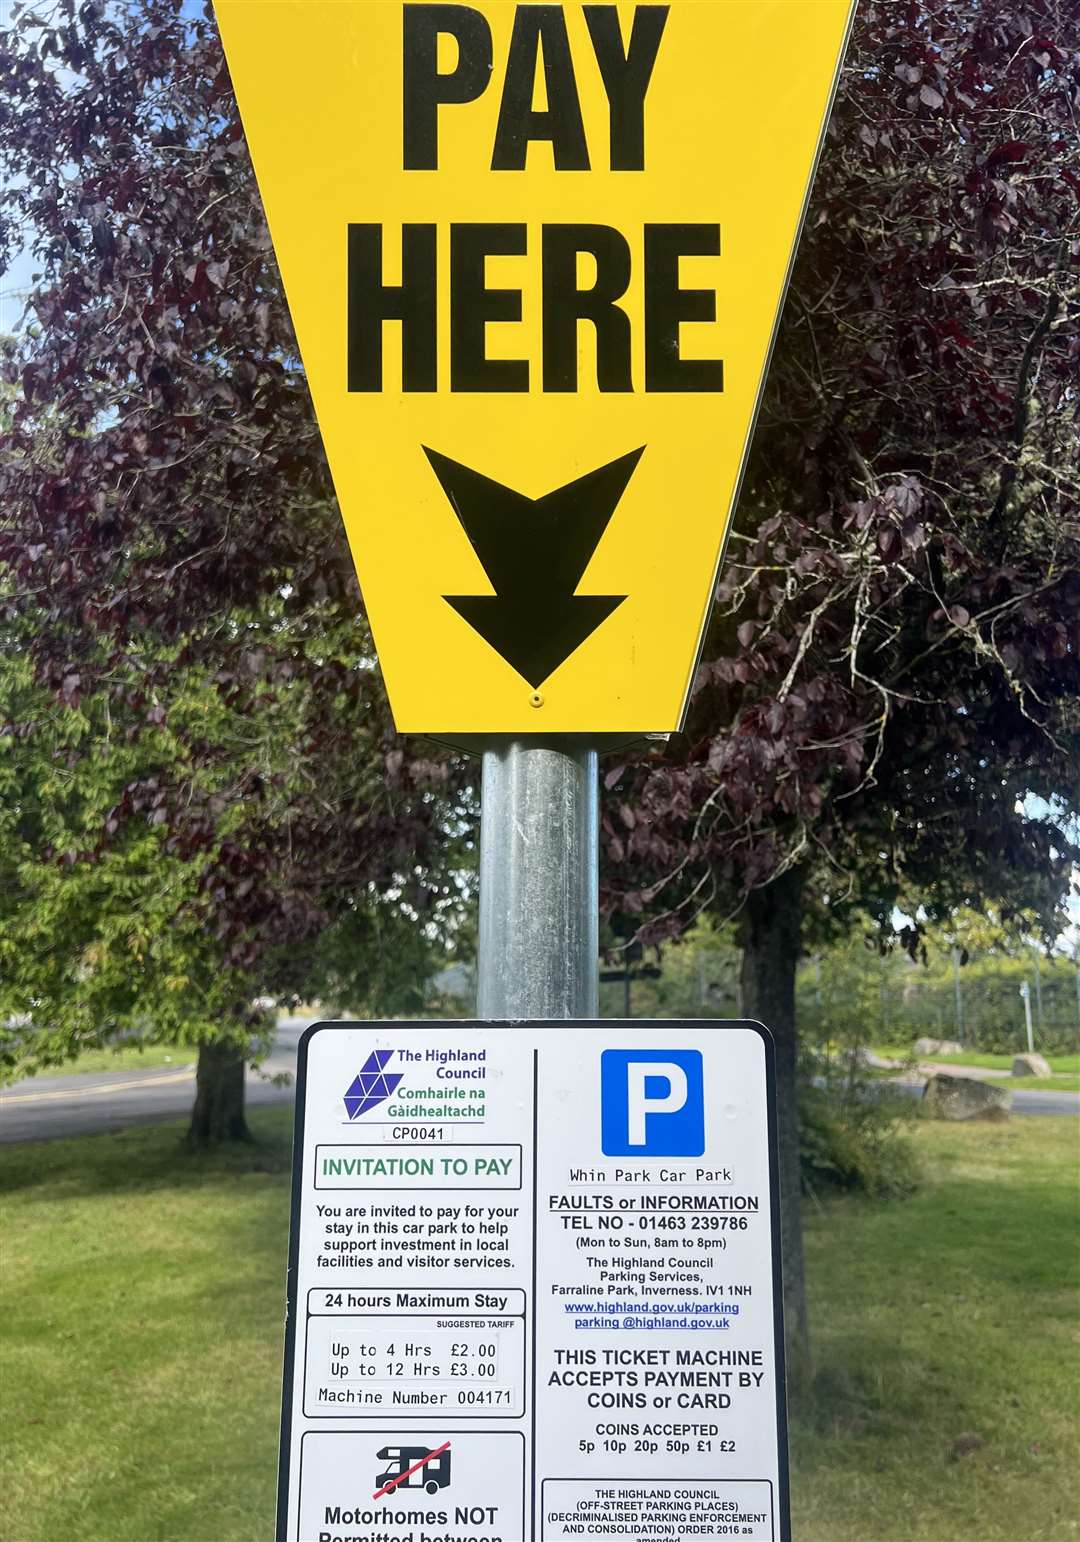 Drivers are invited to pay for using the car park.